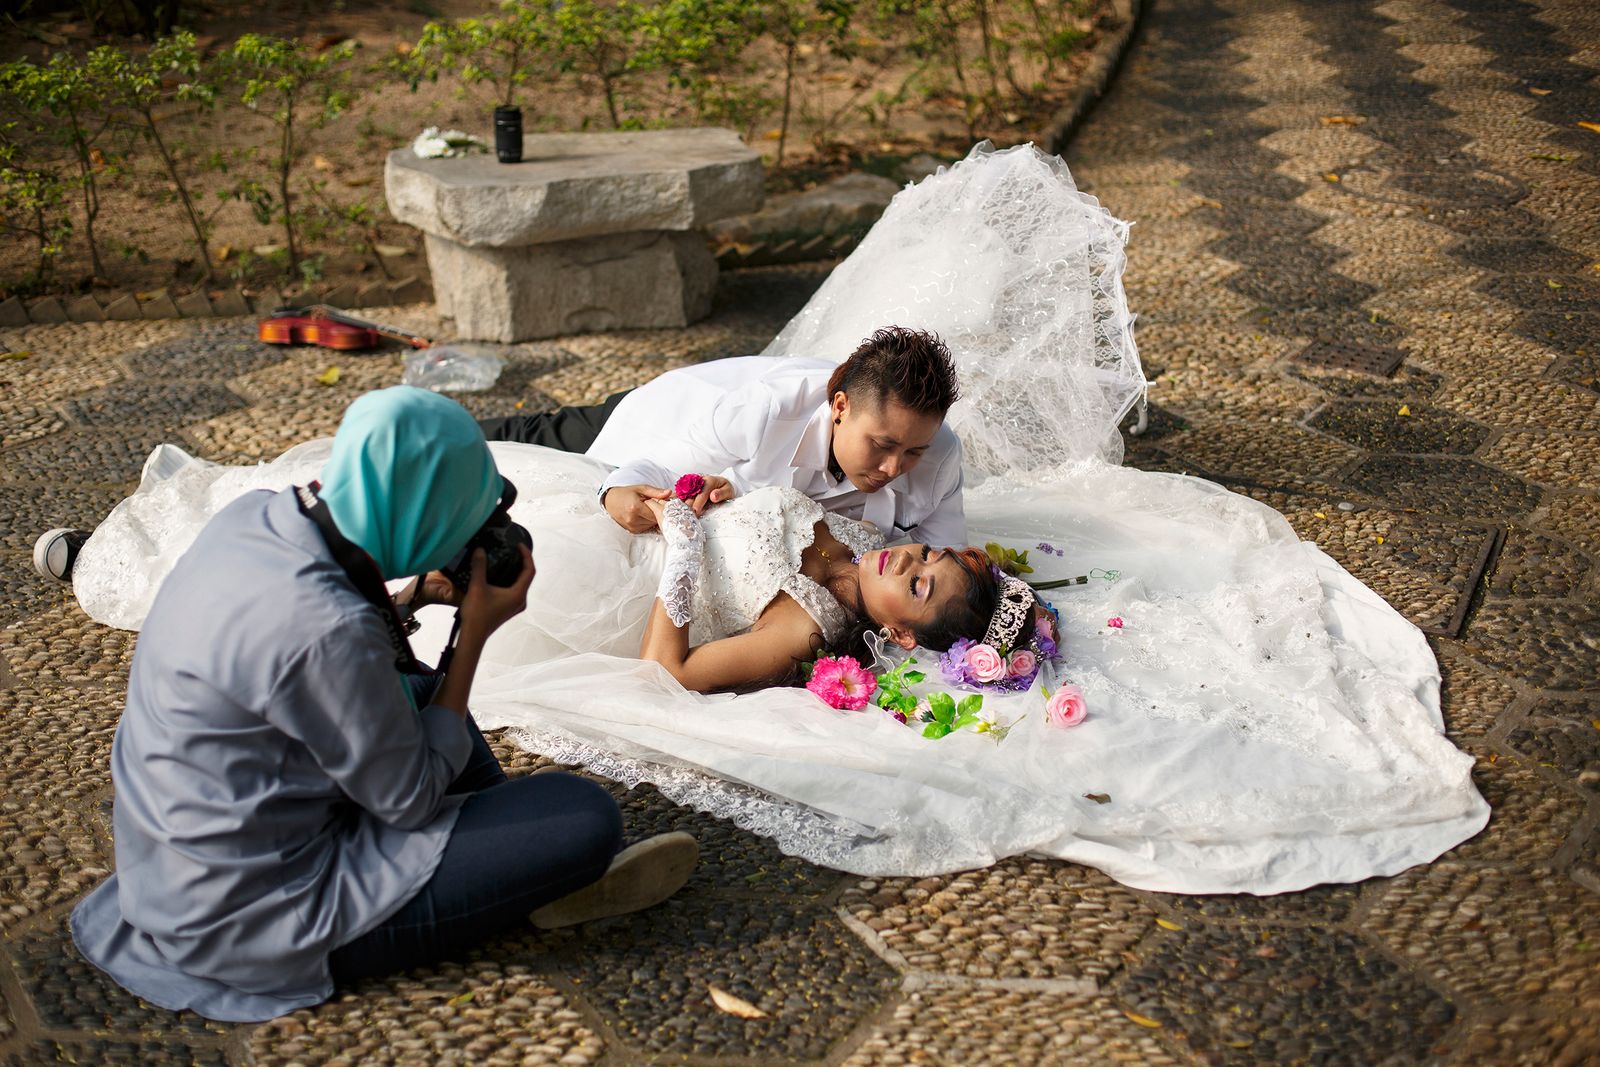 © Rebecca Sampson - Muslim, tomboy and beauty queen come together to document a mock wedding ceremony